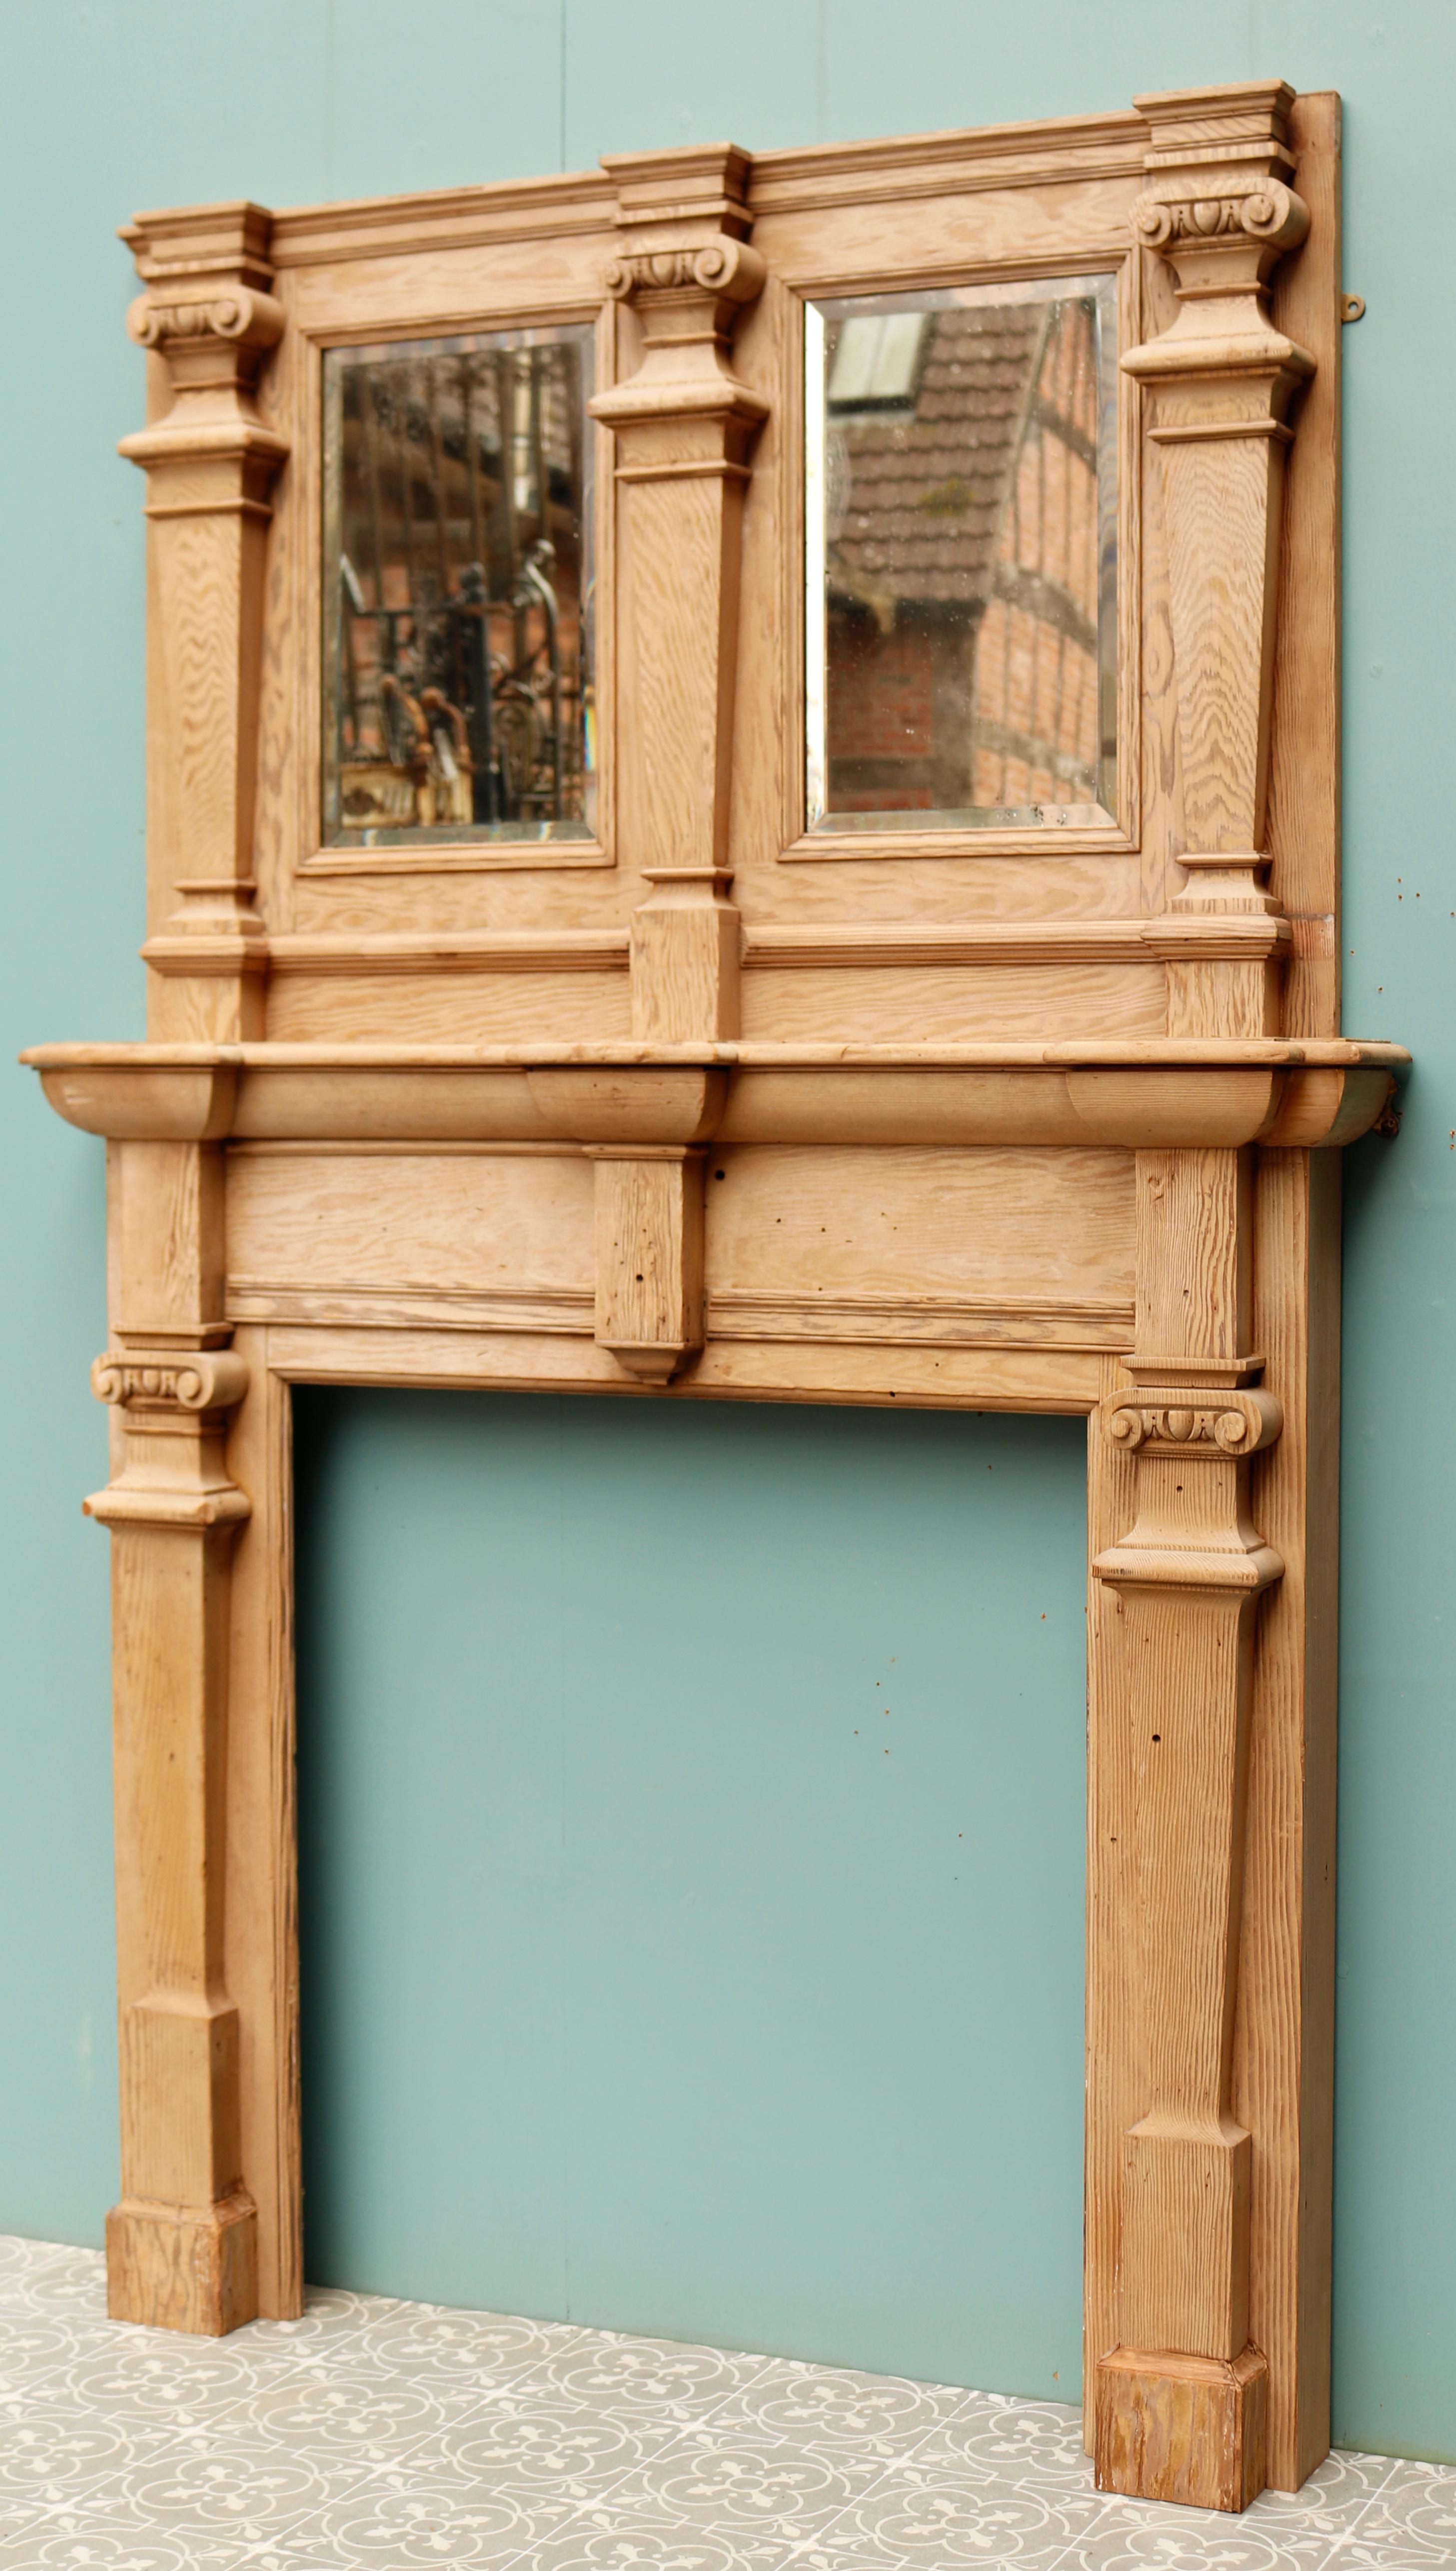 Jacobean style fireplace, with mirrored overmantel. A decorative fireplace, with ‘egg and dart’ moulding, ionic capitals. Two original mirror plates on the overmantel with evidence of light foxing.

Additional dimensions

Opening height 91.5